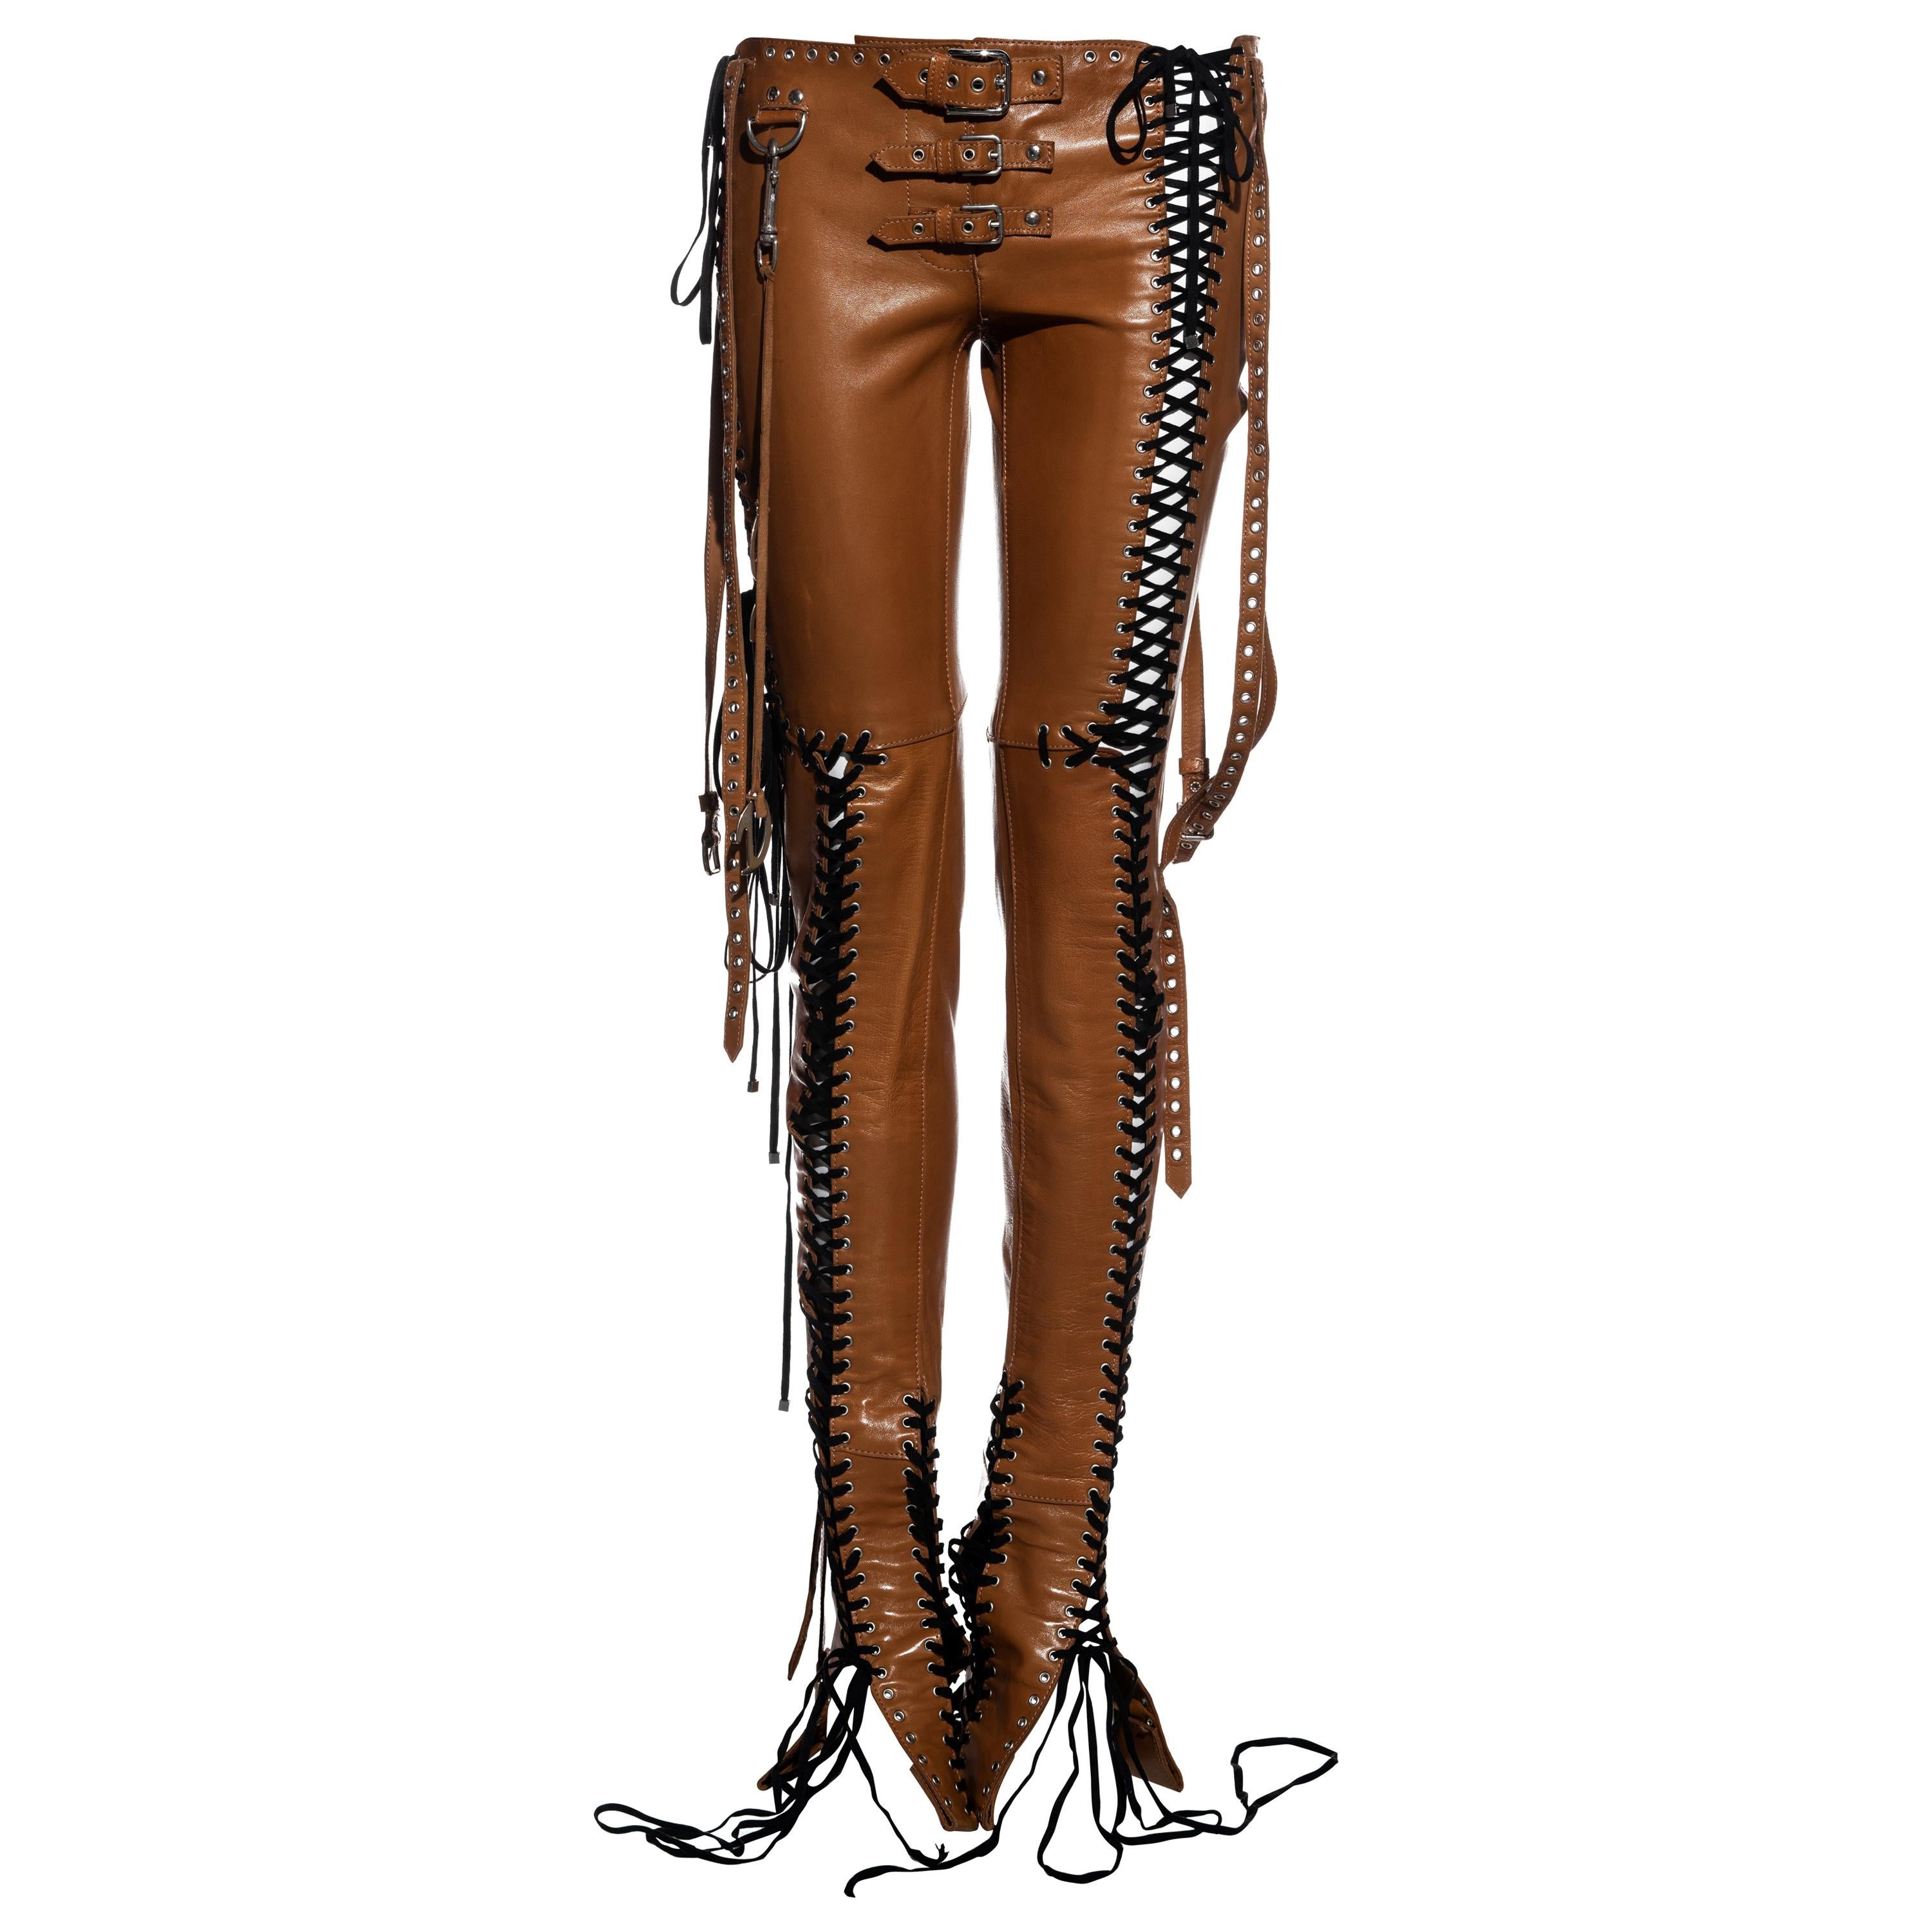 Dolce & Gabbana tan lace up leather pants, ss 2003 For Sale